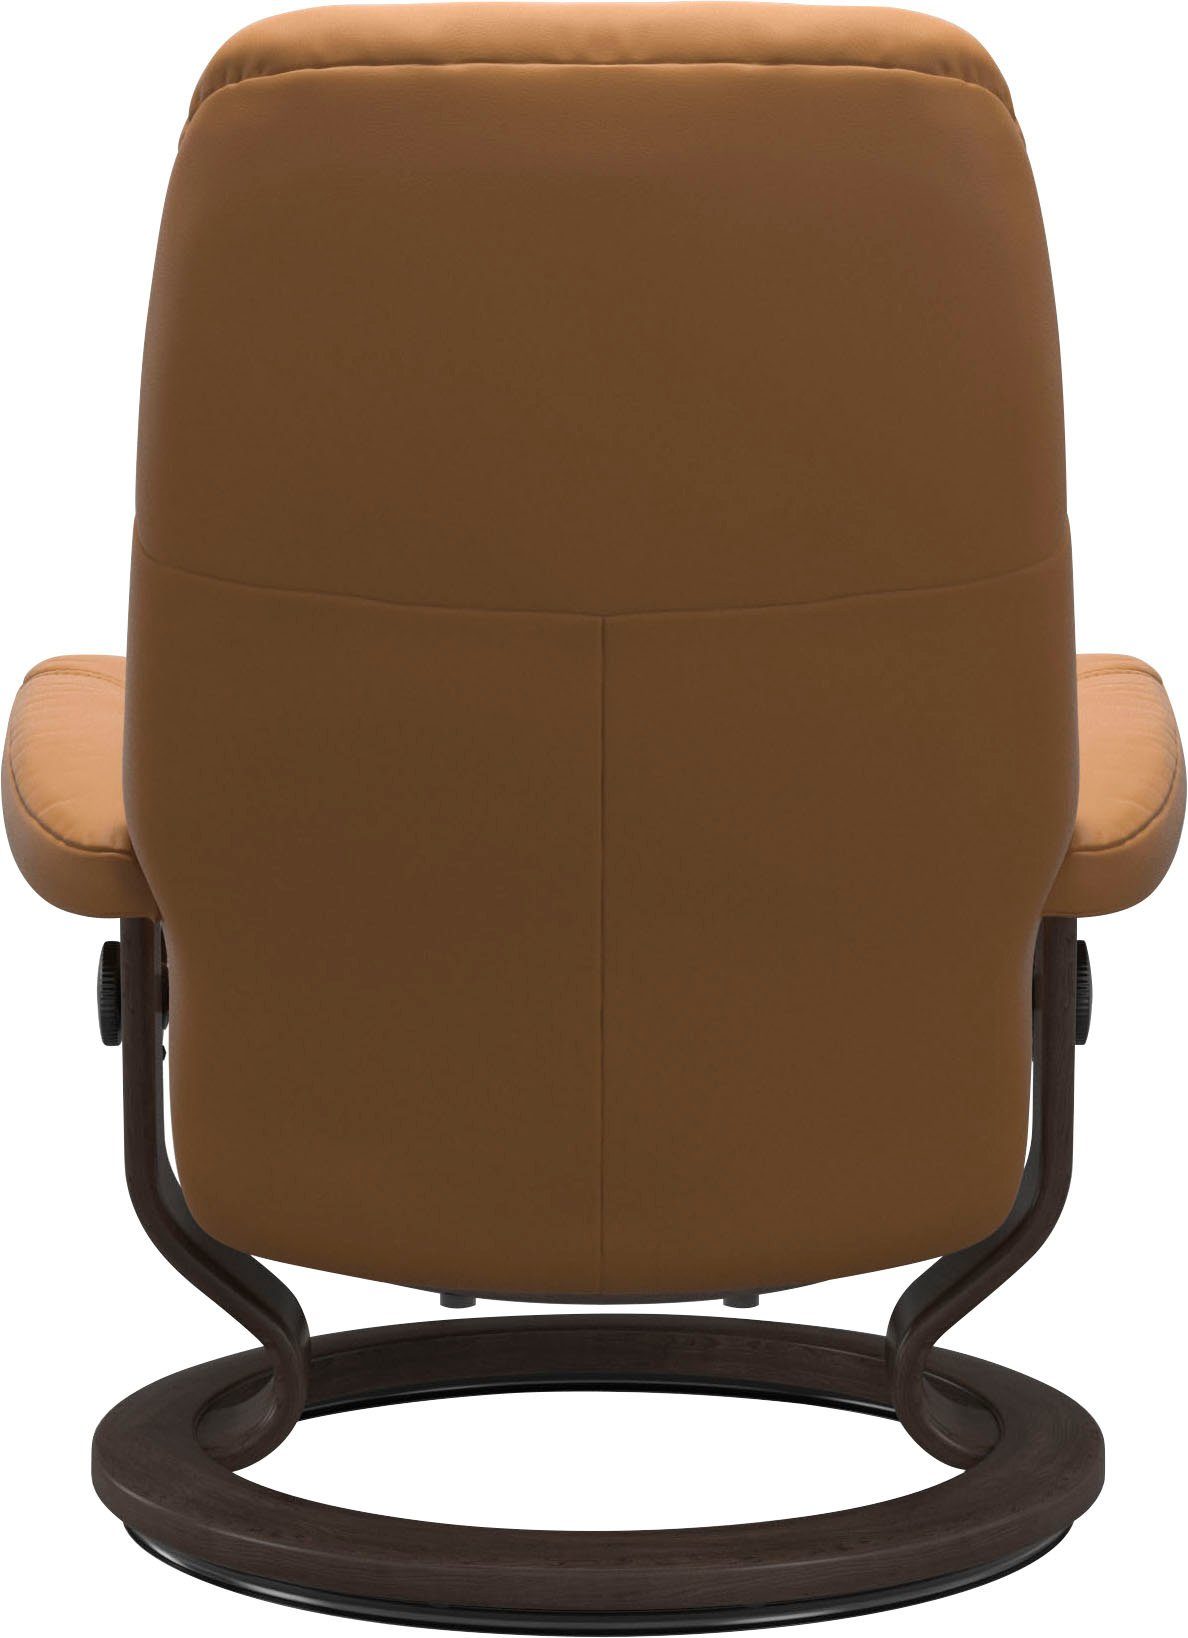 Stressless® Relaxsessel Gestell Größe M, Classic Base, Consul, Wenge mit